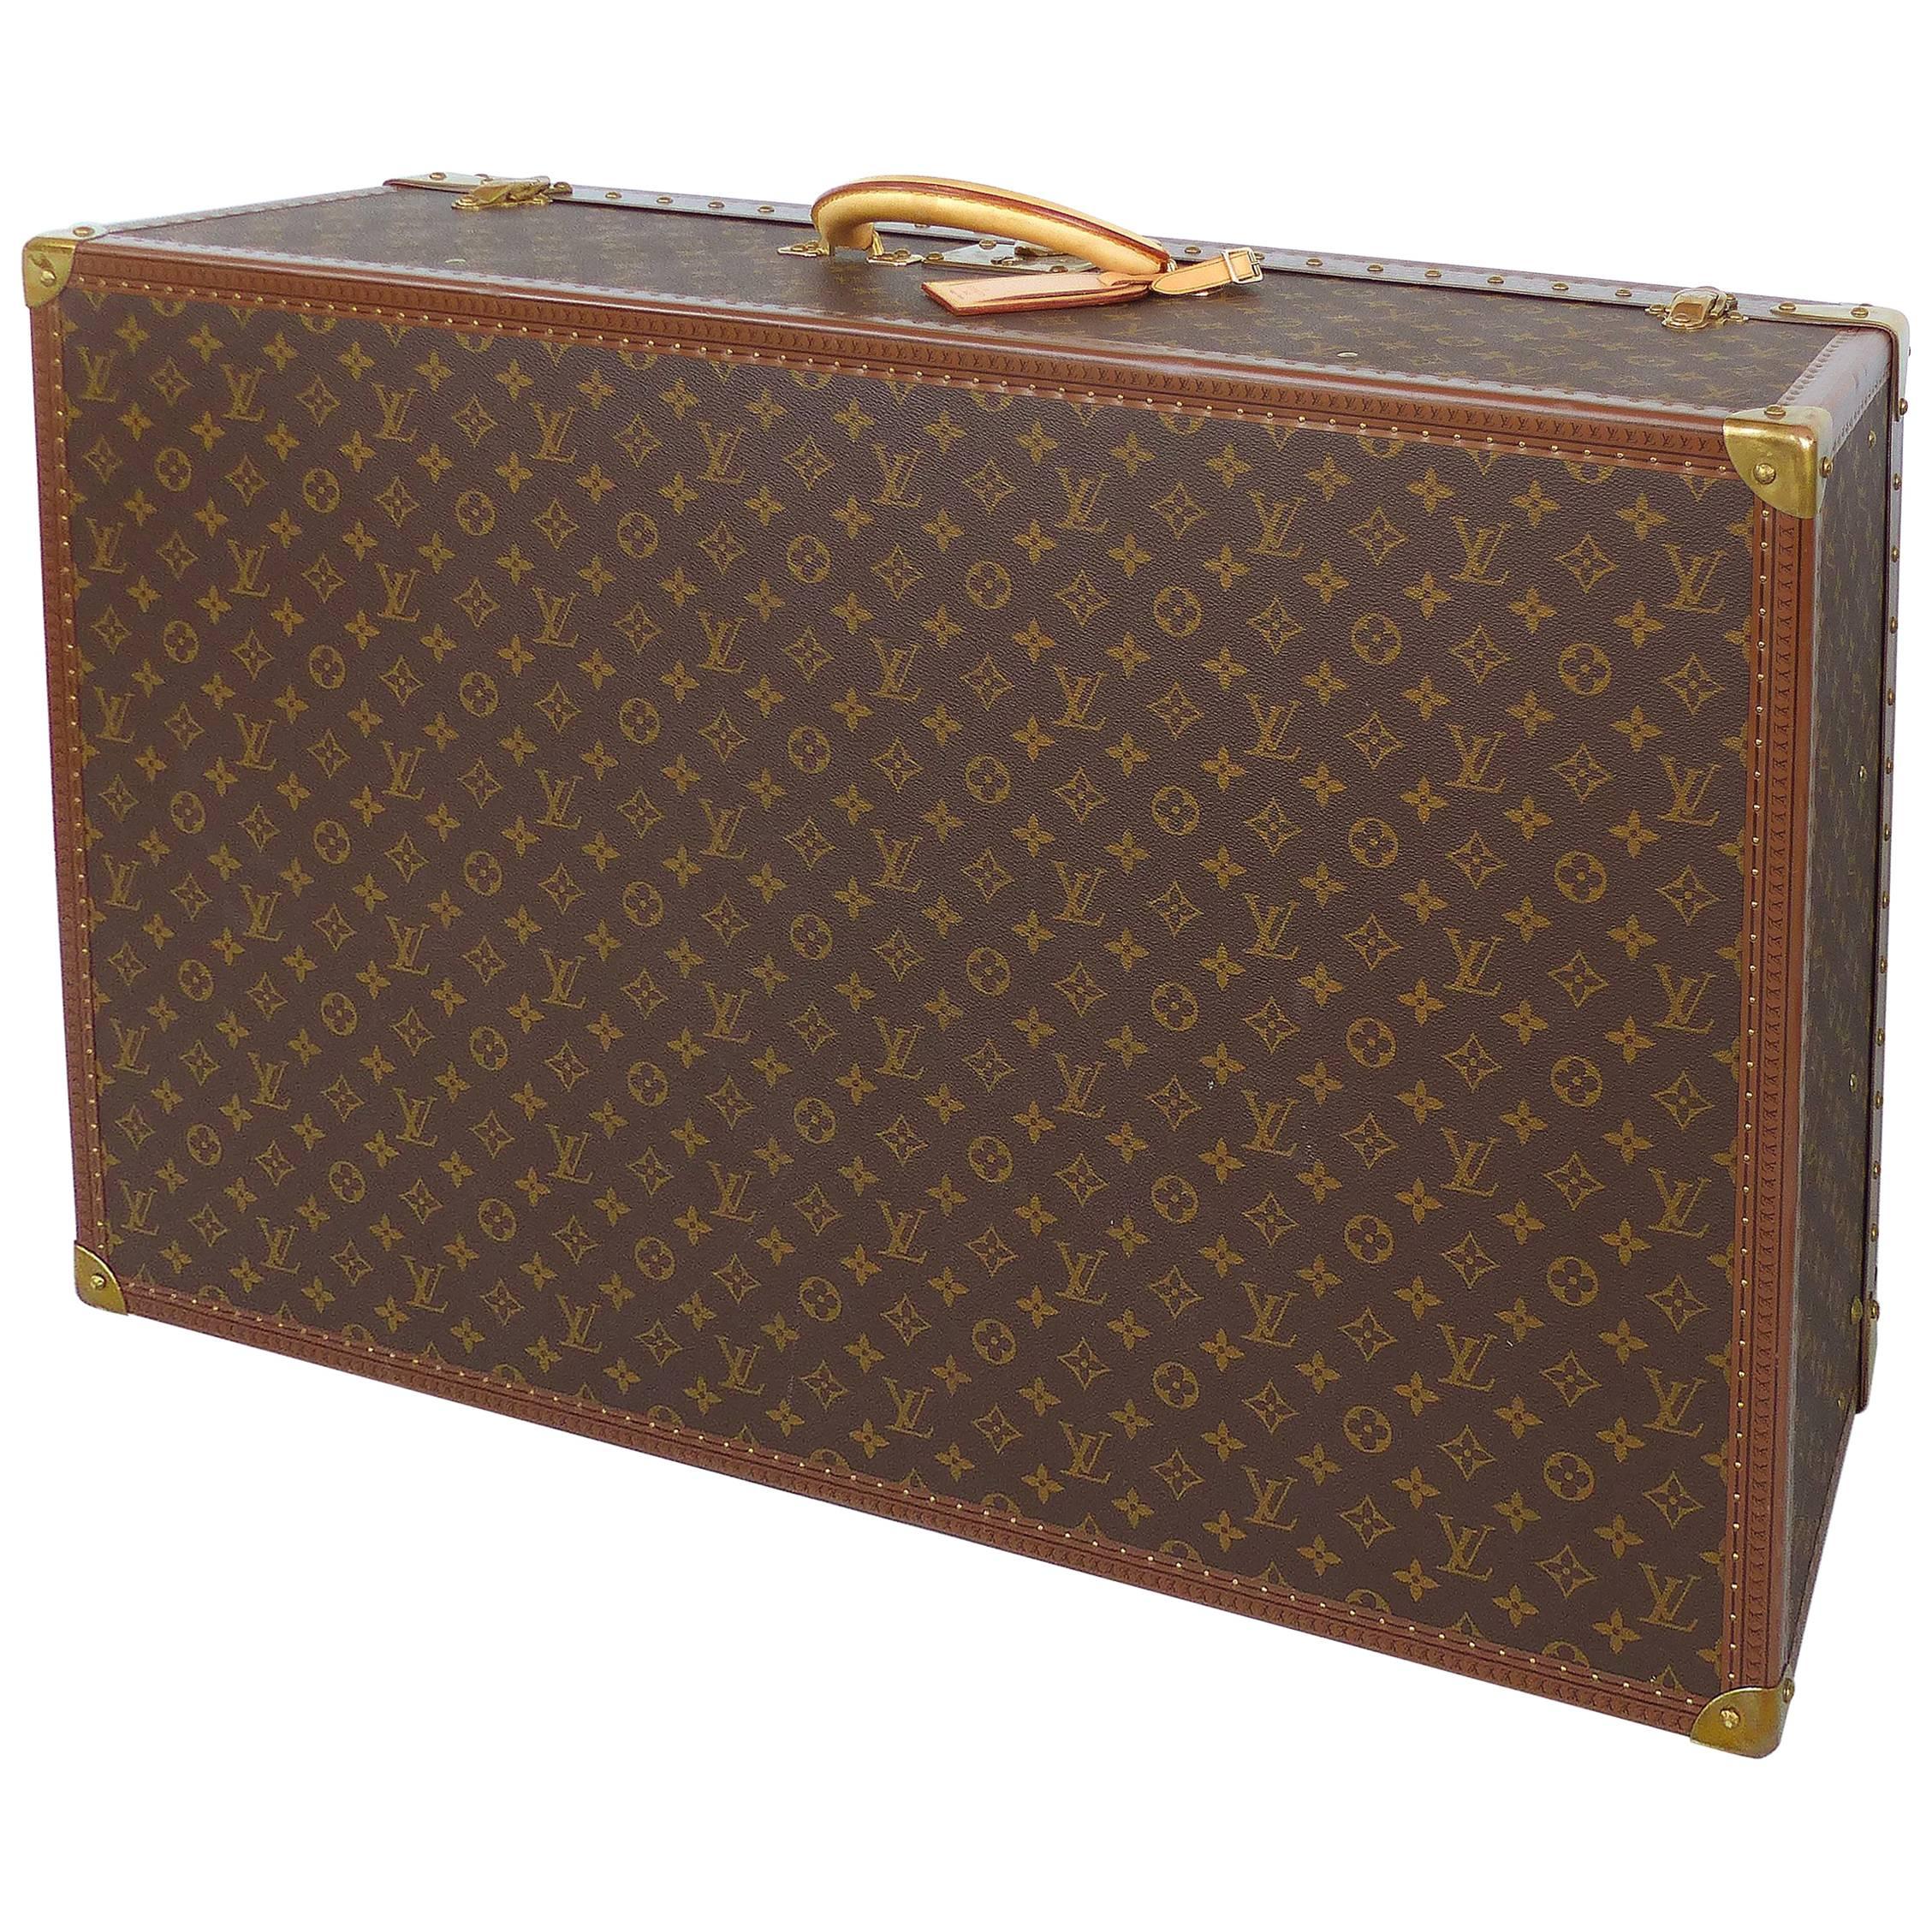 Louis Vuitton Alzer 80 Leather and Brass Suitcase with Original Protective Cover